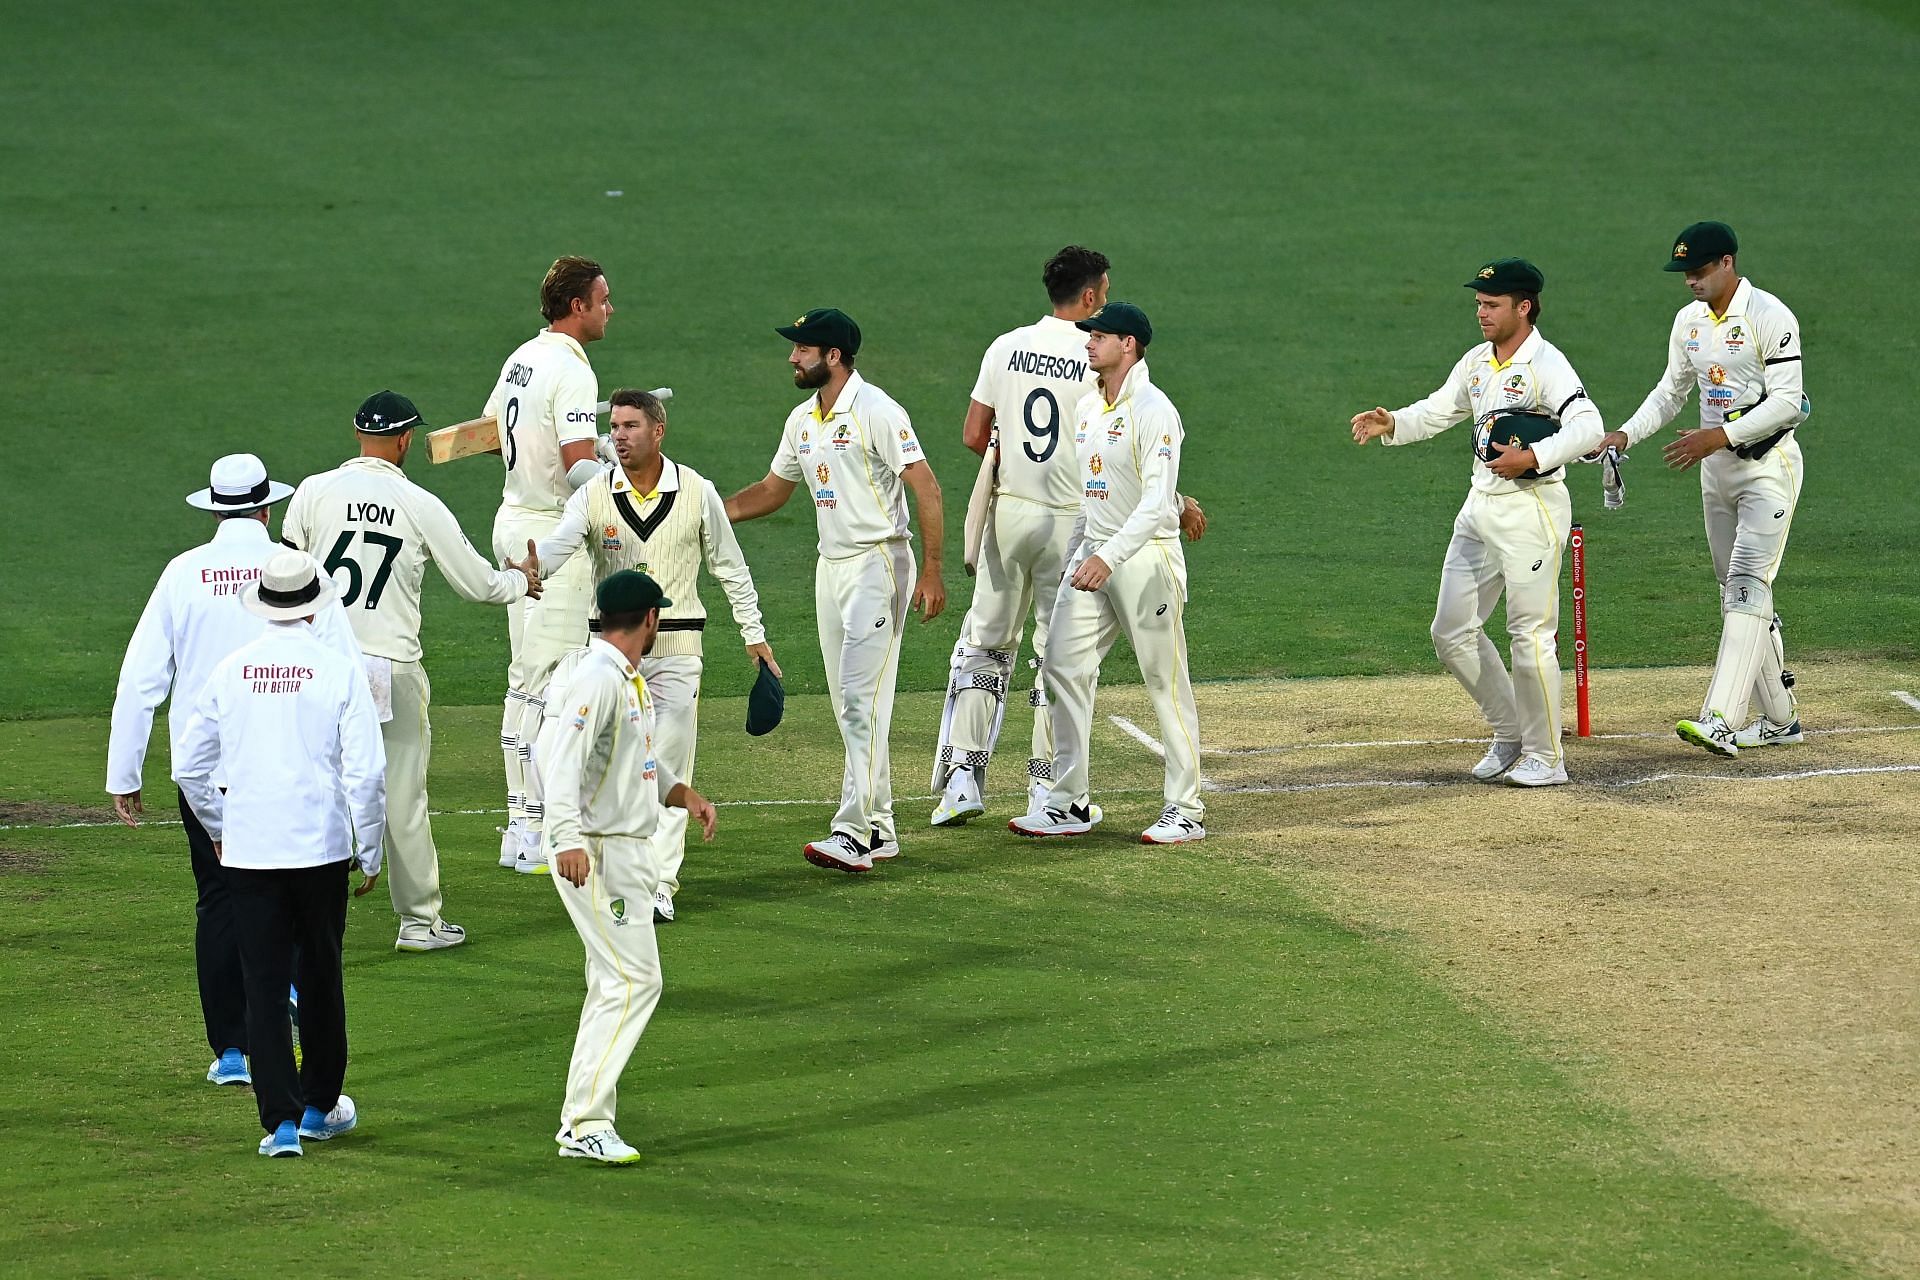 Australia won the second Test by 275 runs in Adelaide